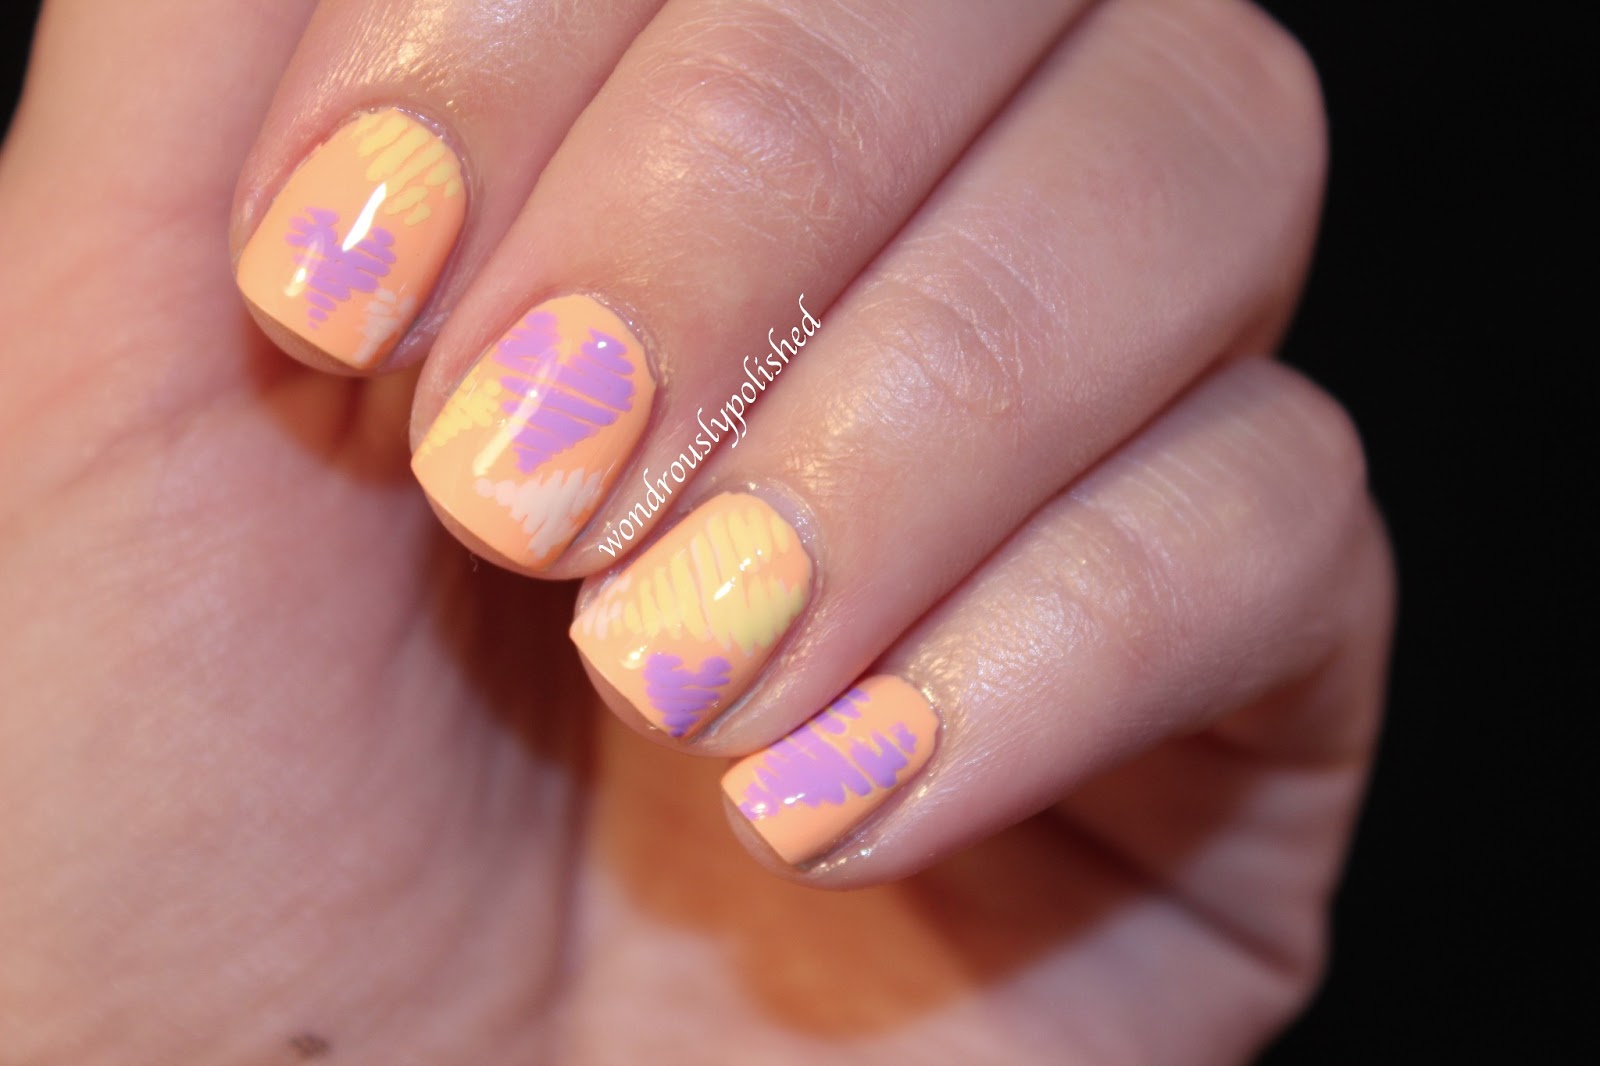 February Nail Designs with Hearts and Flowers - wide 7